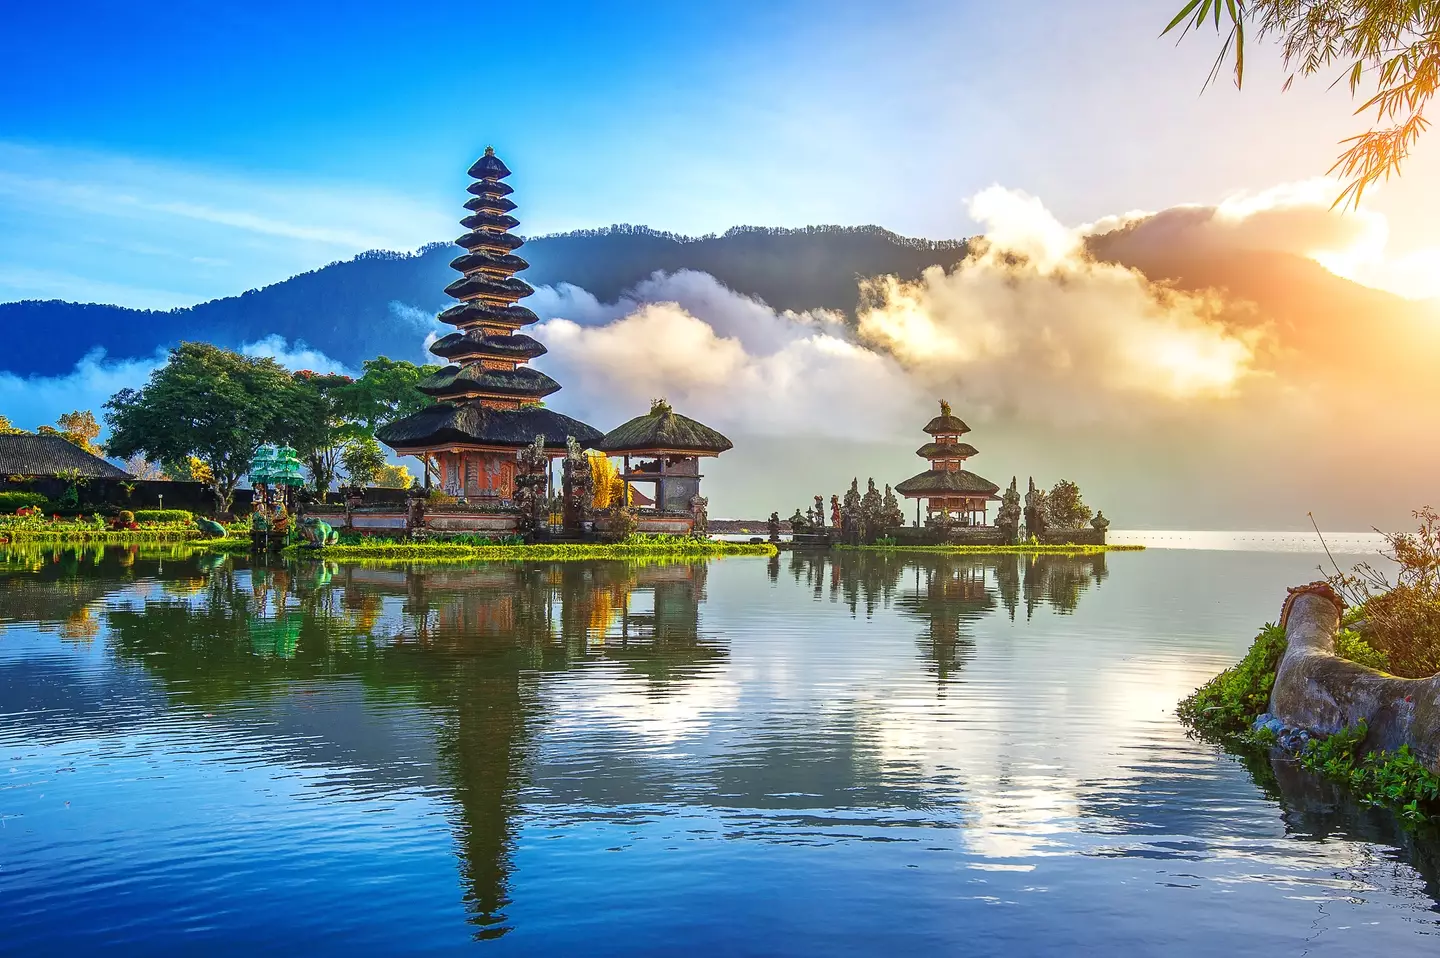 Freelancers will soon be able to work tax-free in Indonesia, including on the island of Bali.